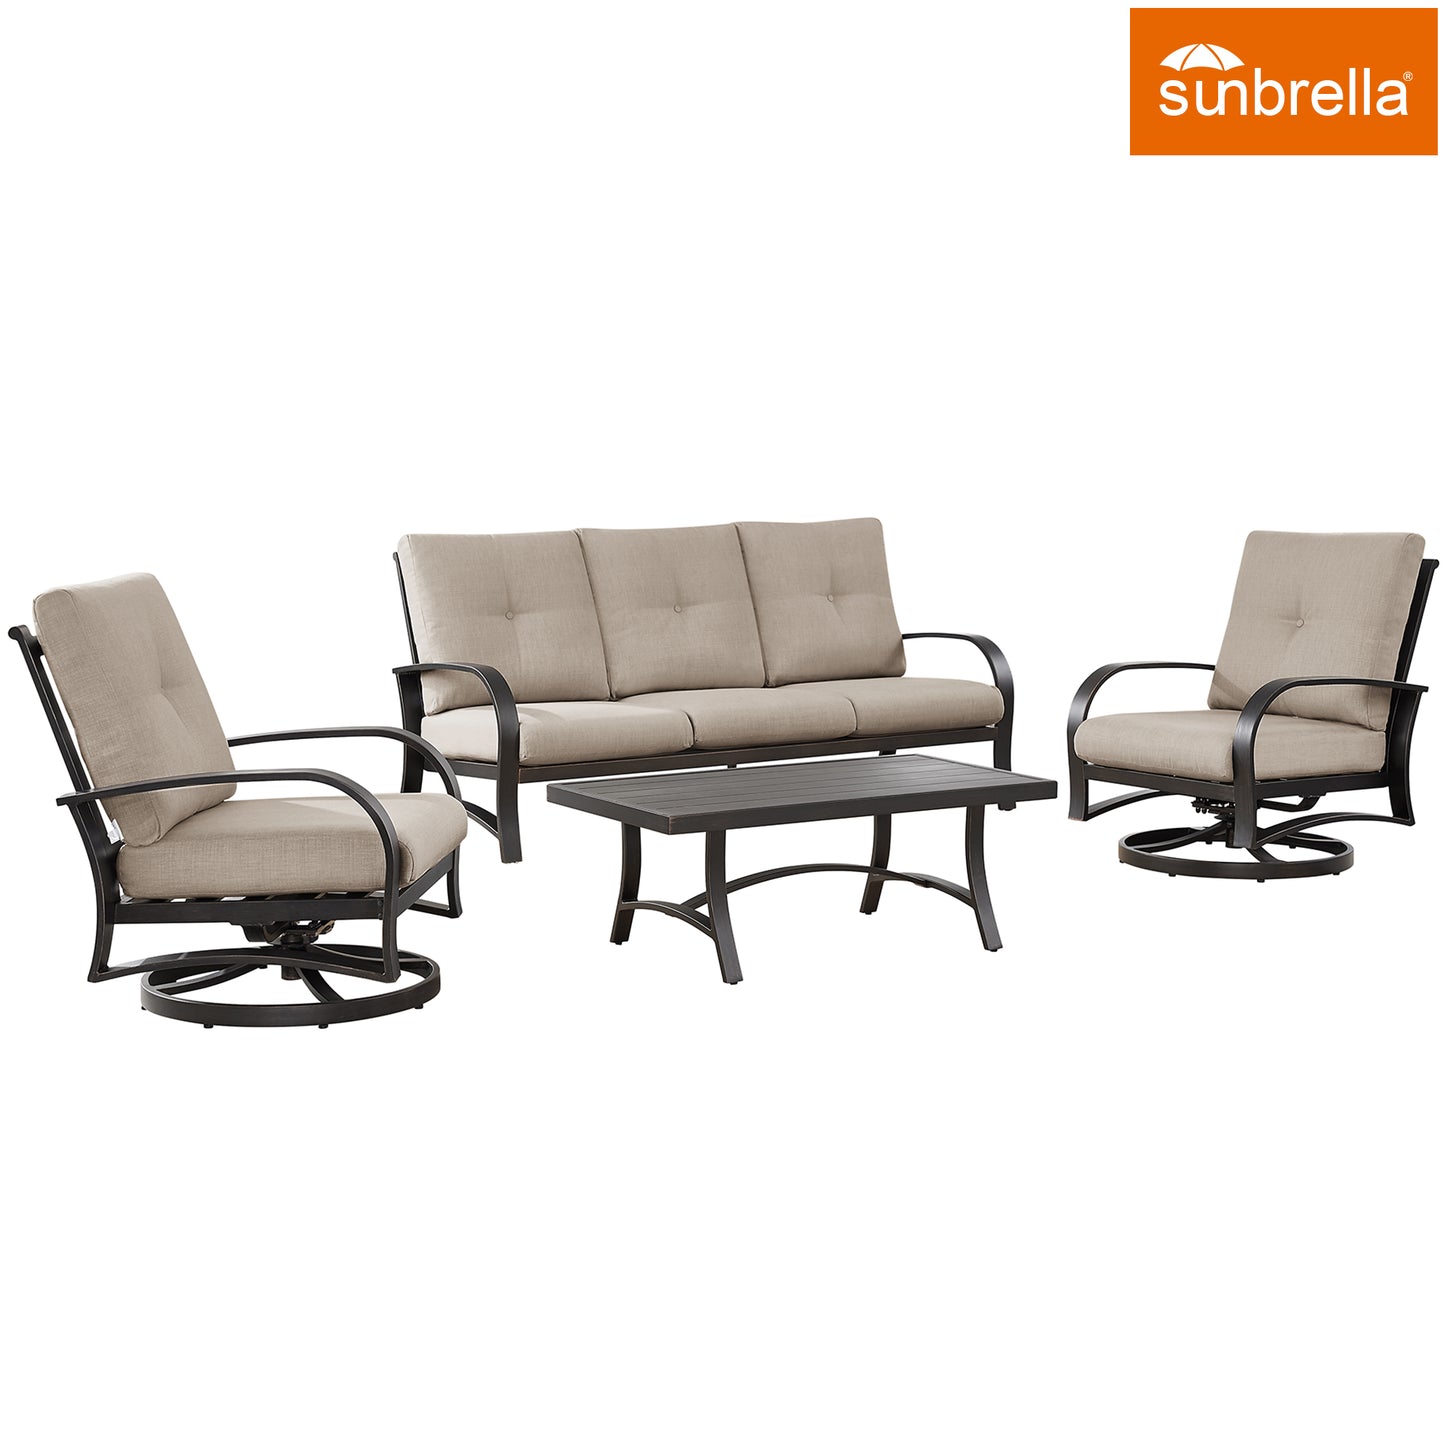 4 Pieces Outdoor Aluminum Patio Conversation Seating Group, Indoor Swivel Chairs with Sunbrella Cusions and Coffee Table for 5 Person